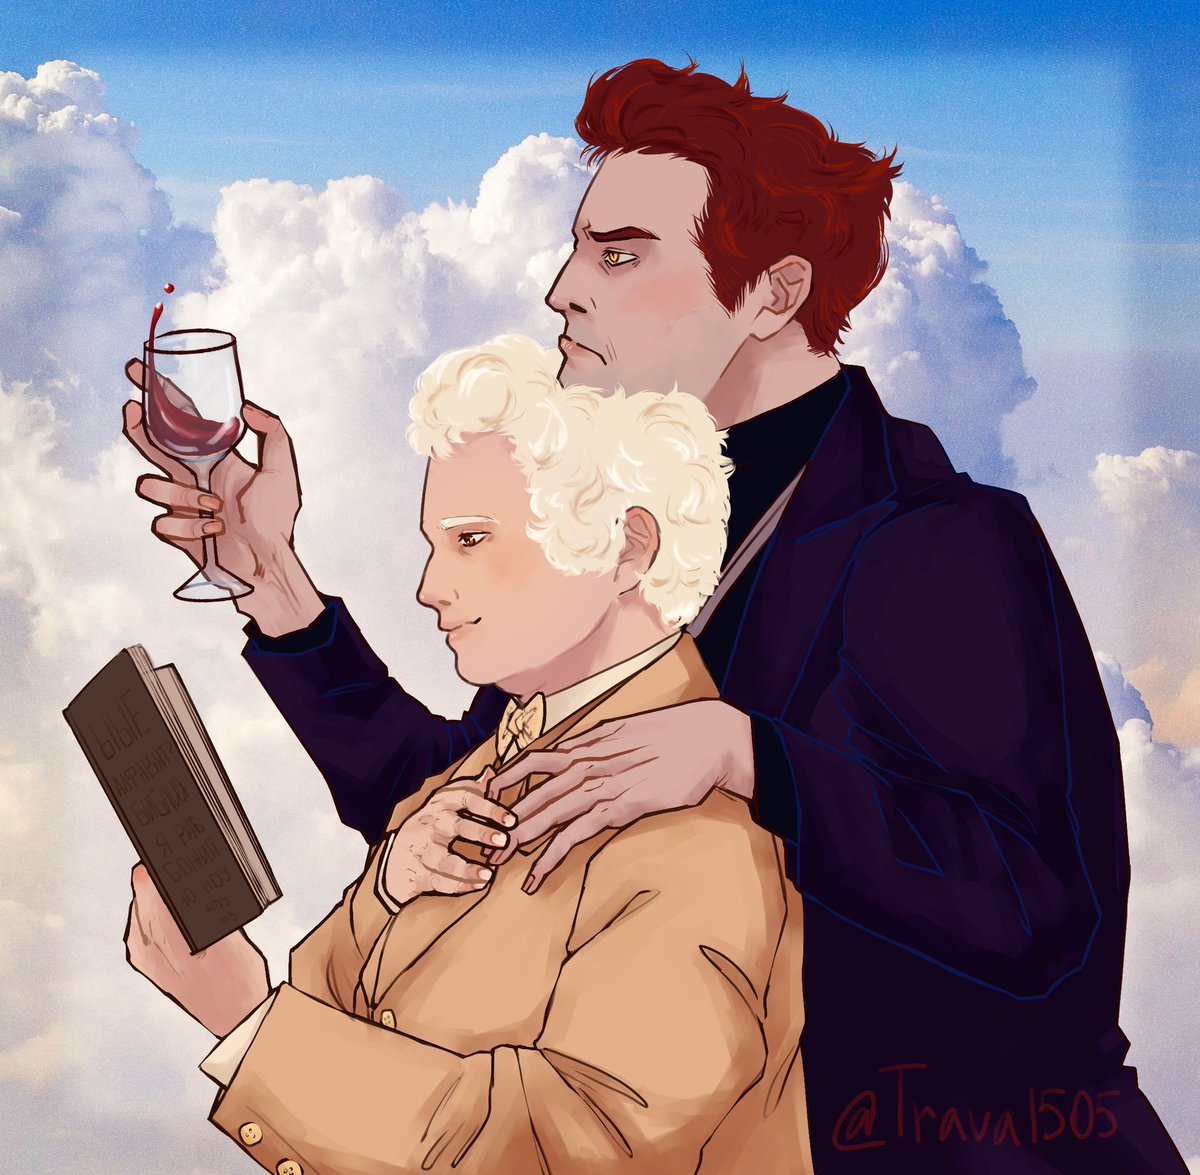 Every day, it's a-getting closer Going faster than a rollercoaster Love like yours will surely come my way A-hey, a-hey-hey #GoodOmens2 #Aziraphale #Crowley